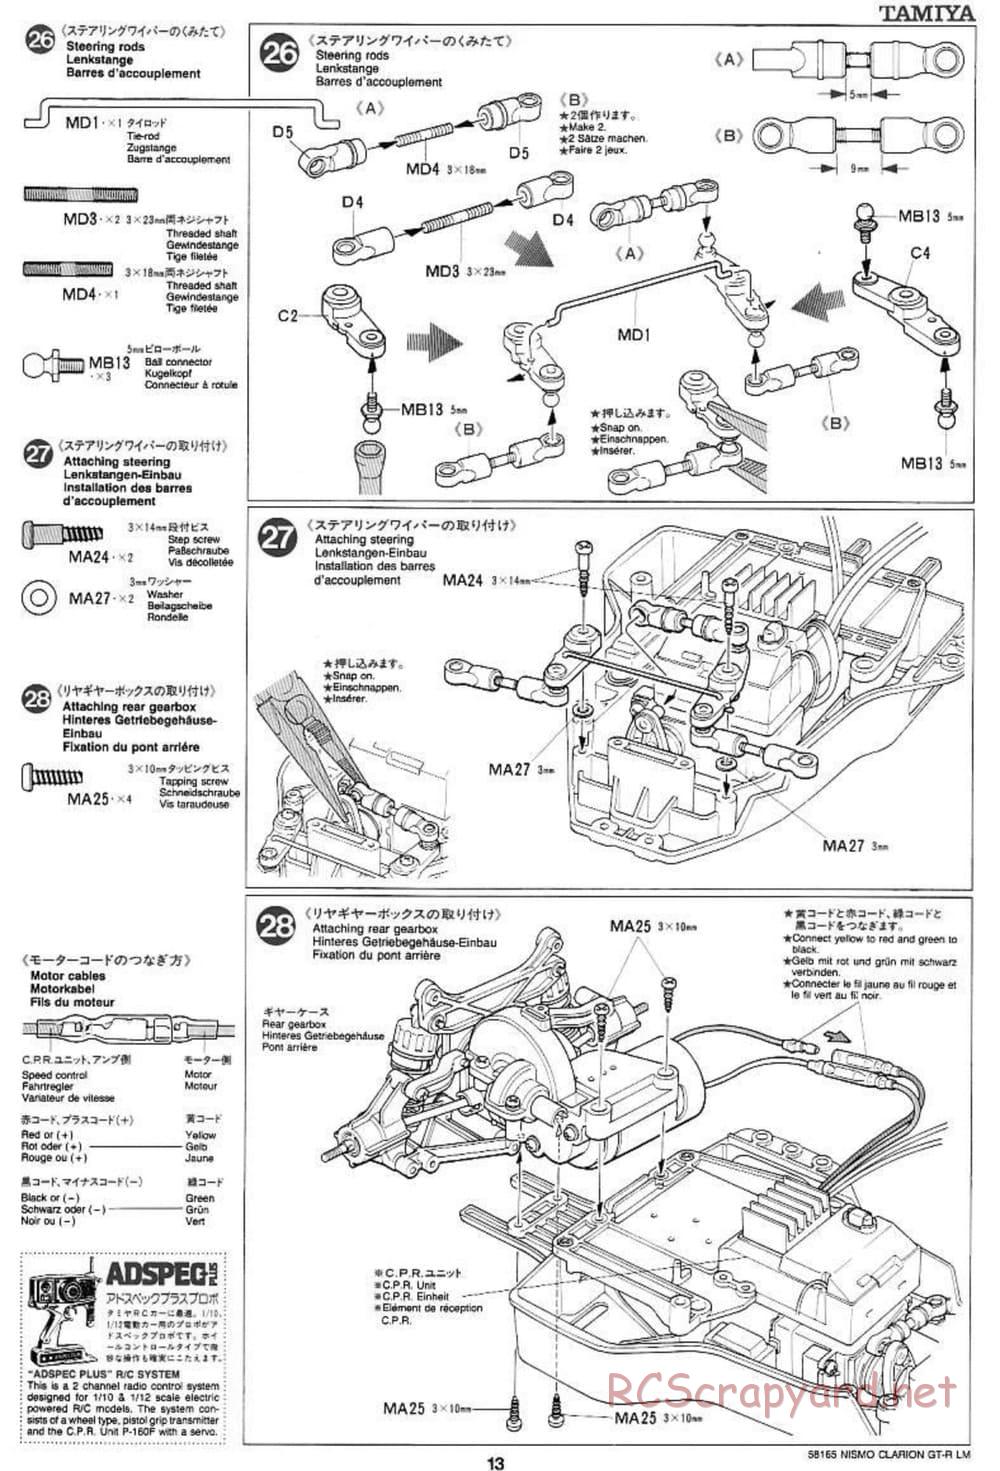 Tamiya - Nismo Clarion GT-R LM - TA-02W Chassis - Manual - Page 13